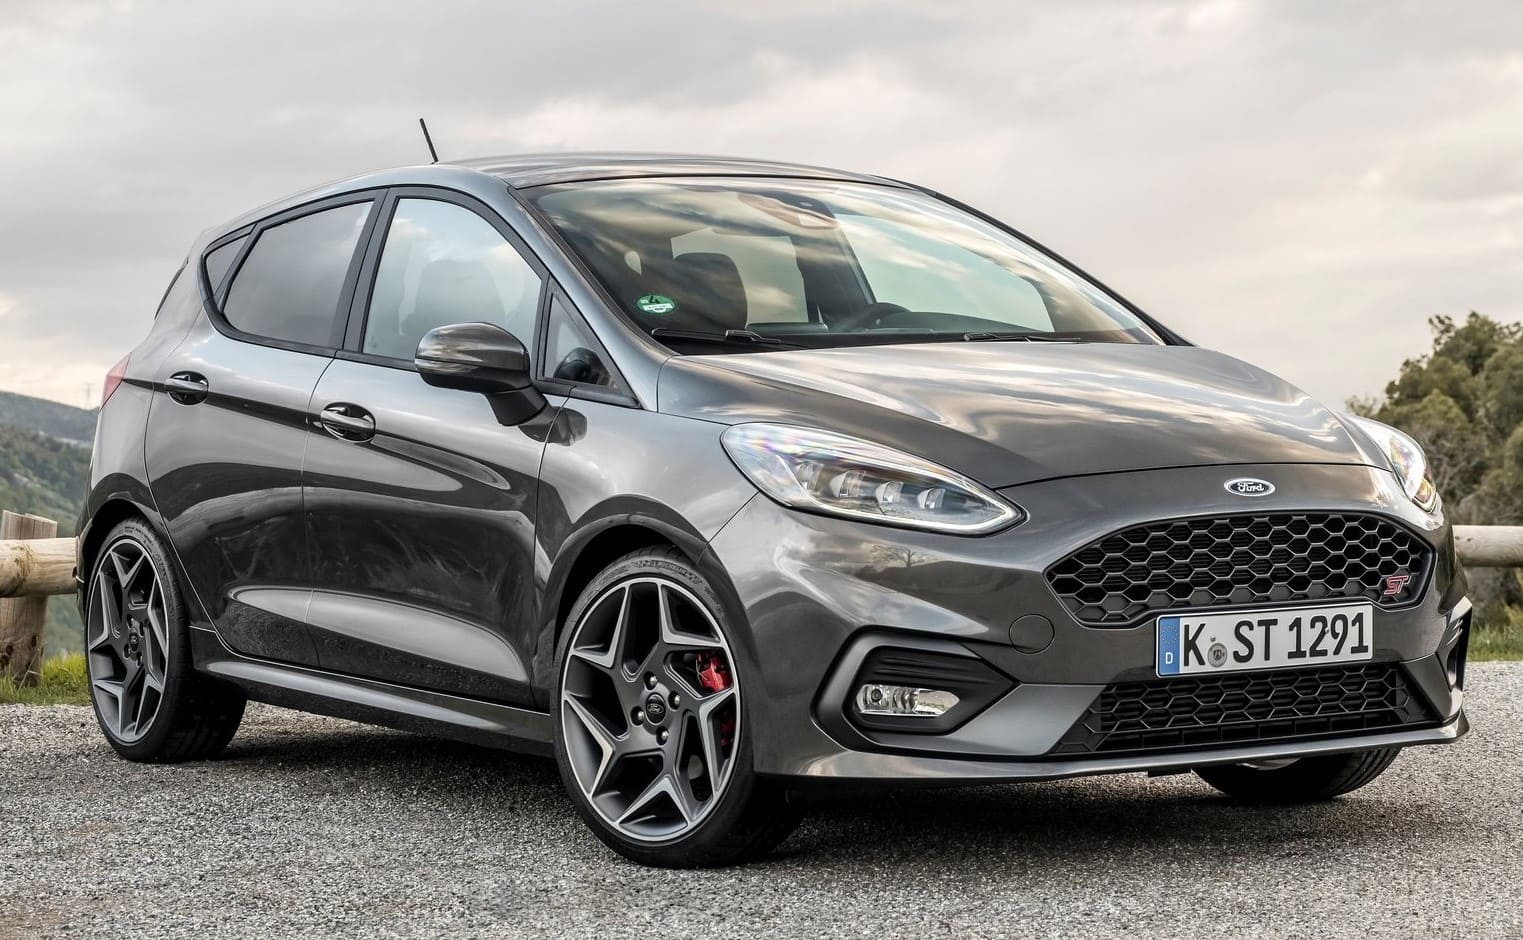 Ford Fiesta ST: ¿3 cilindros son suficientes?